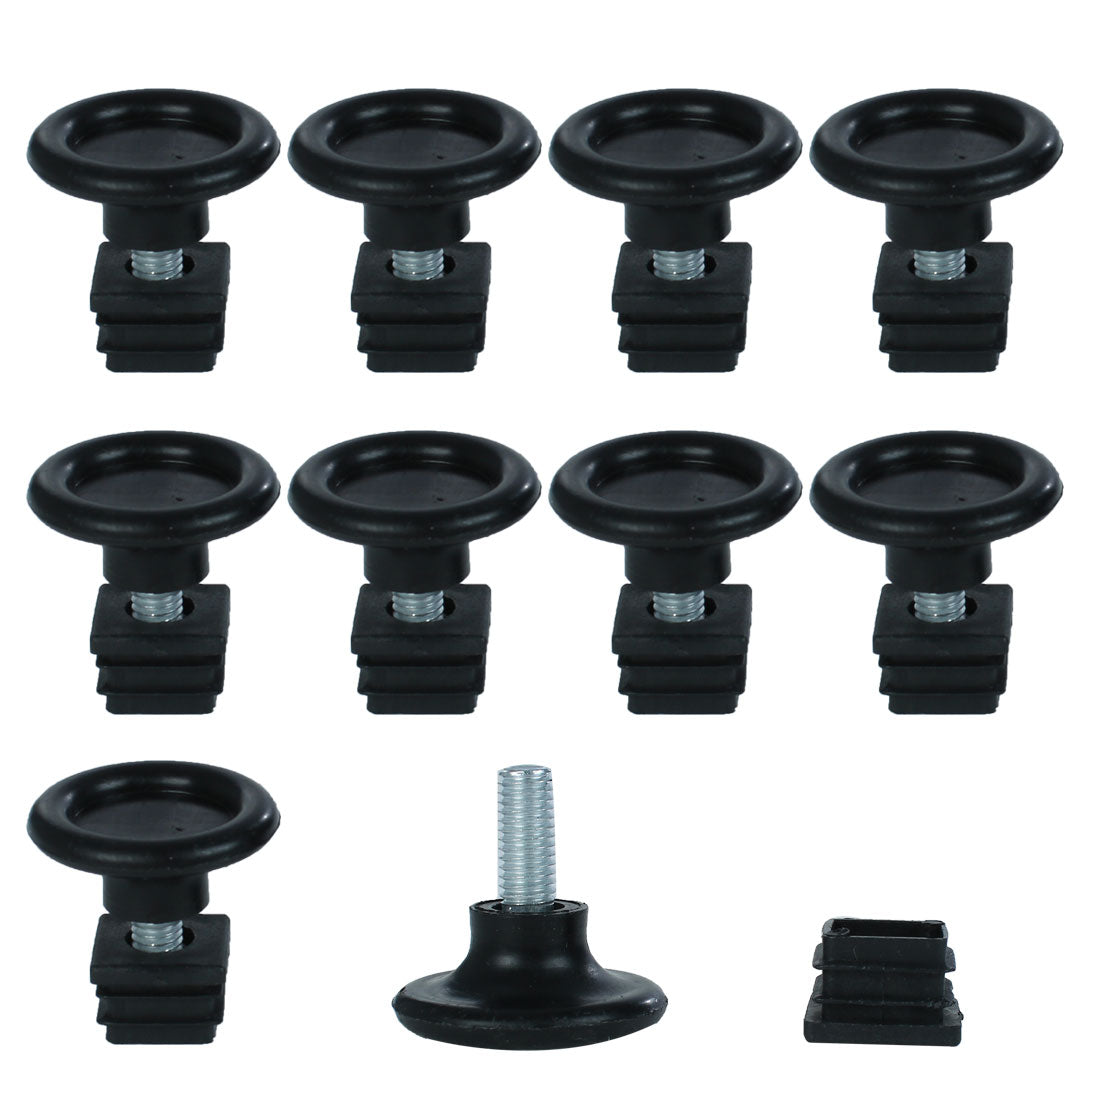 uxcell Uxcell Adjustable Feet 20 x 20mm Square Inserts Furniture Glide 10 Sets Black